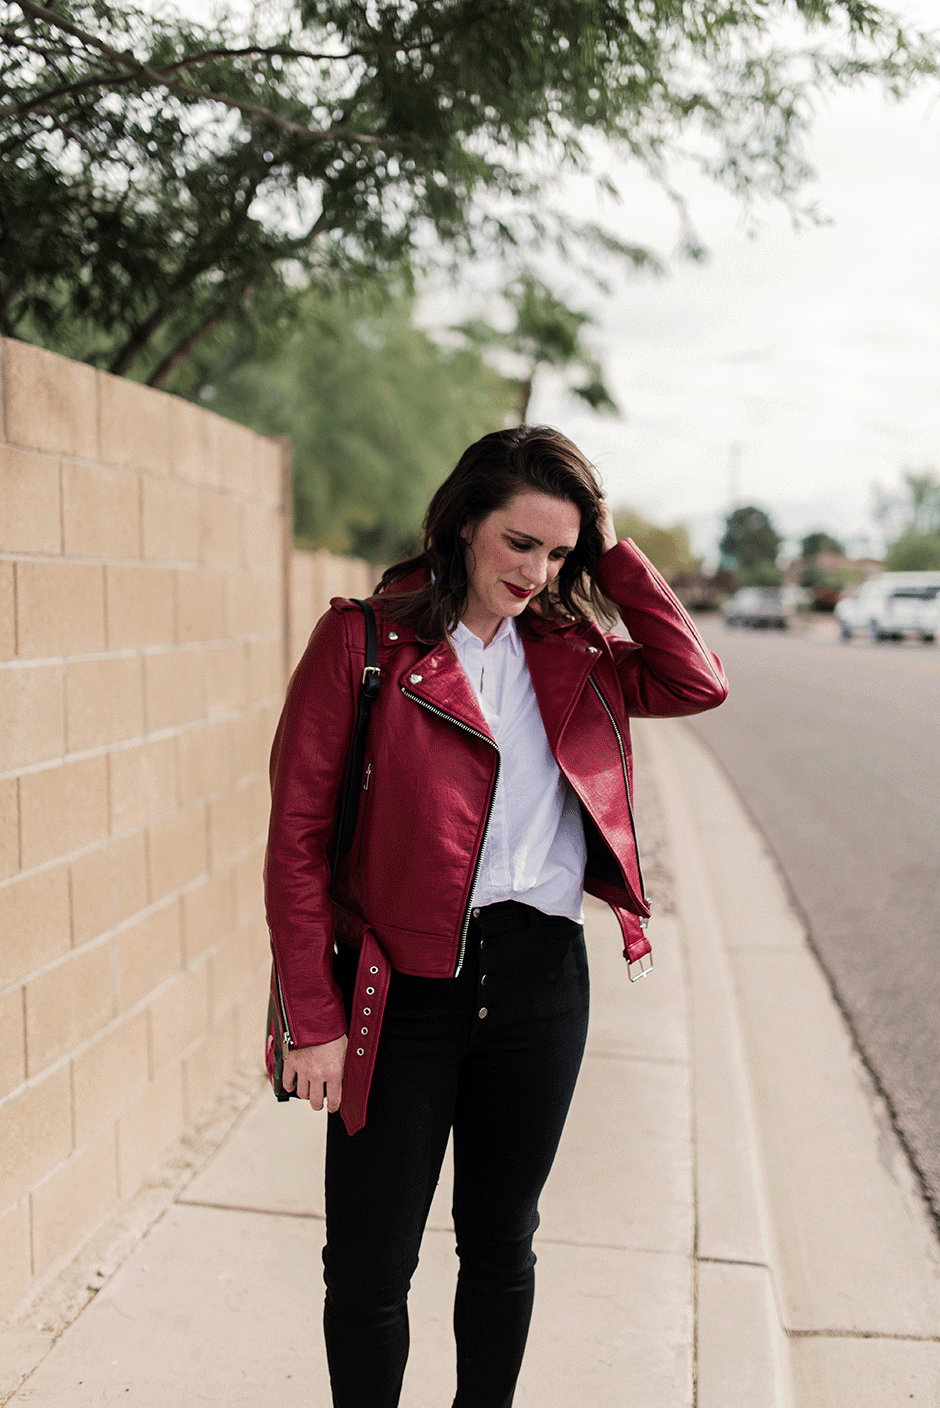 Ever stumped on what to choose for a casual get together with friends? This tough-girl look is the perfect party outfit inspiration. Womens fashion doesn't have to be hard - a leather jacket, jeans and heels do the trick!